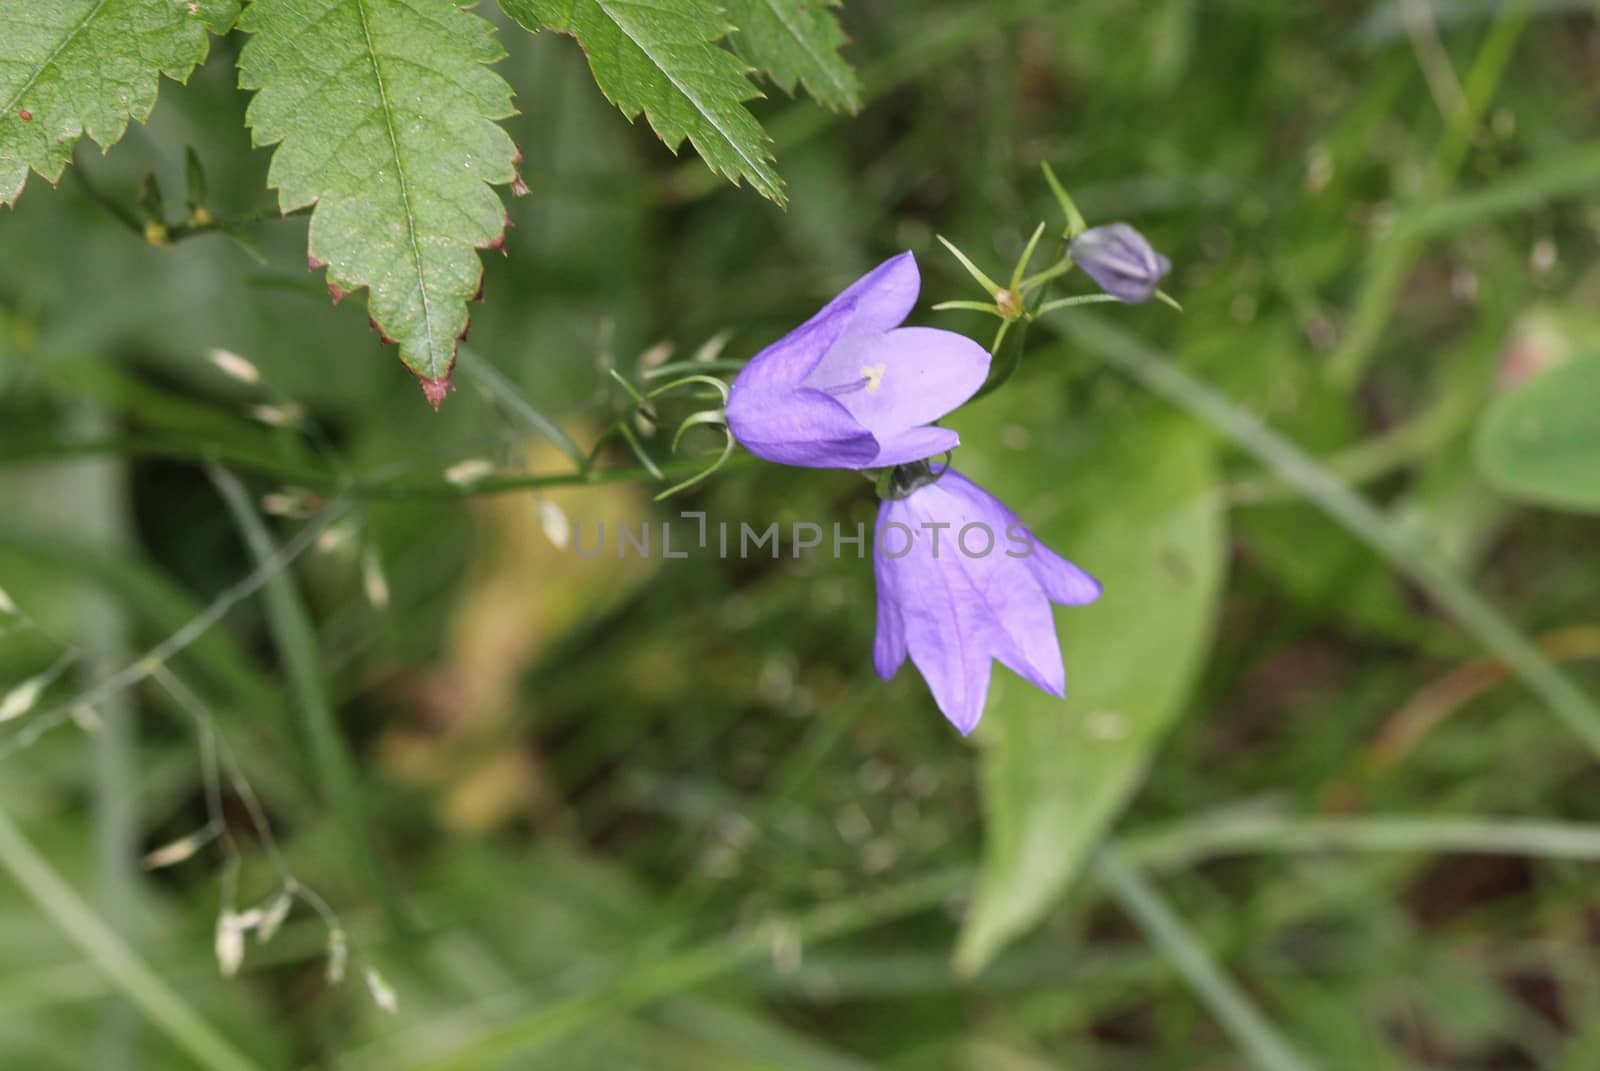 close up of Campanula rotundifolia, known as the harebell, bluebell, blawort, hair-bell and lady's thimble